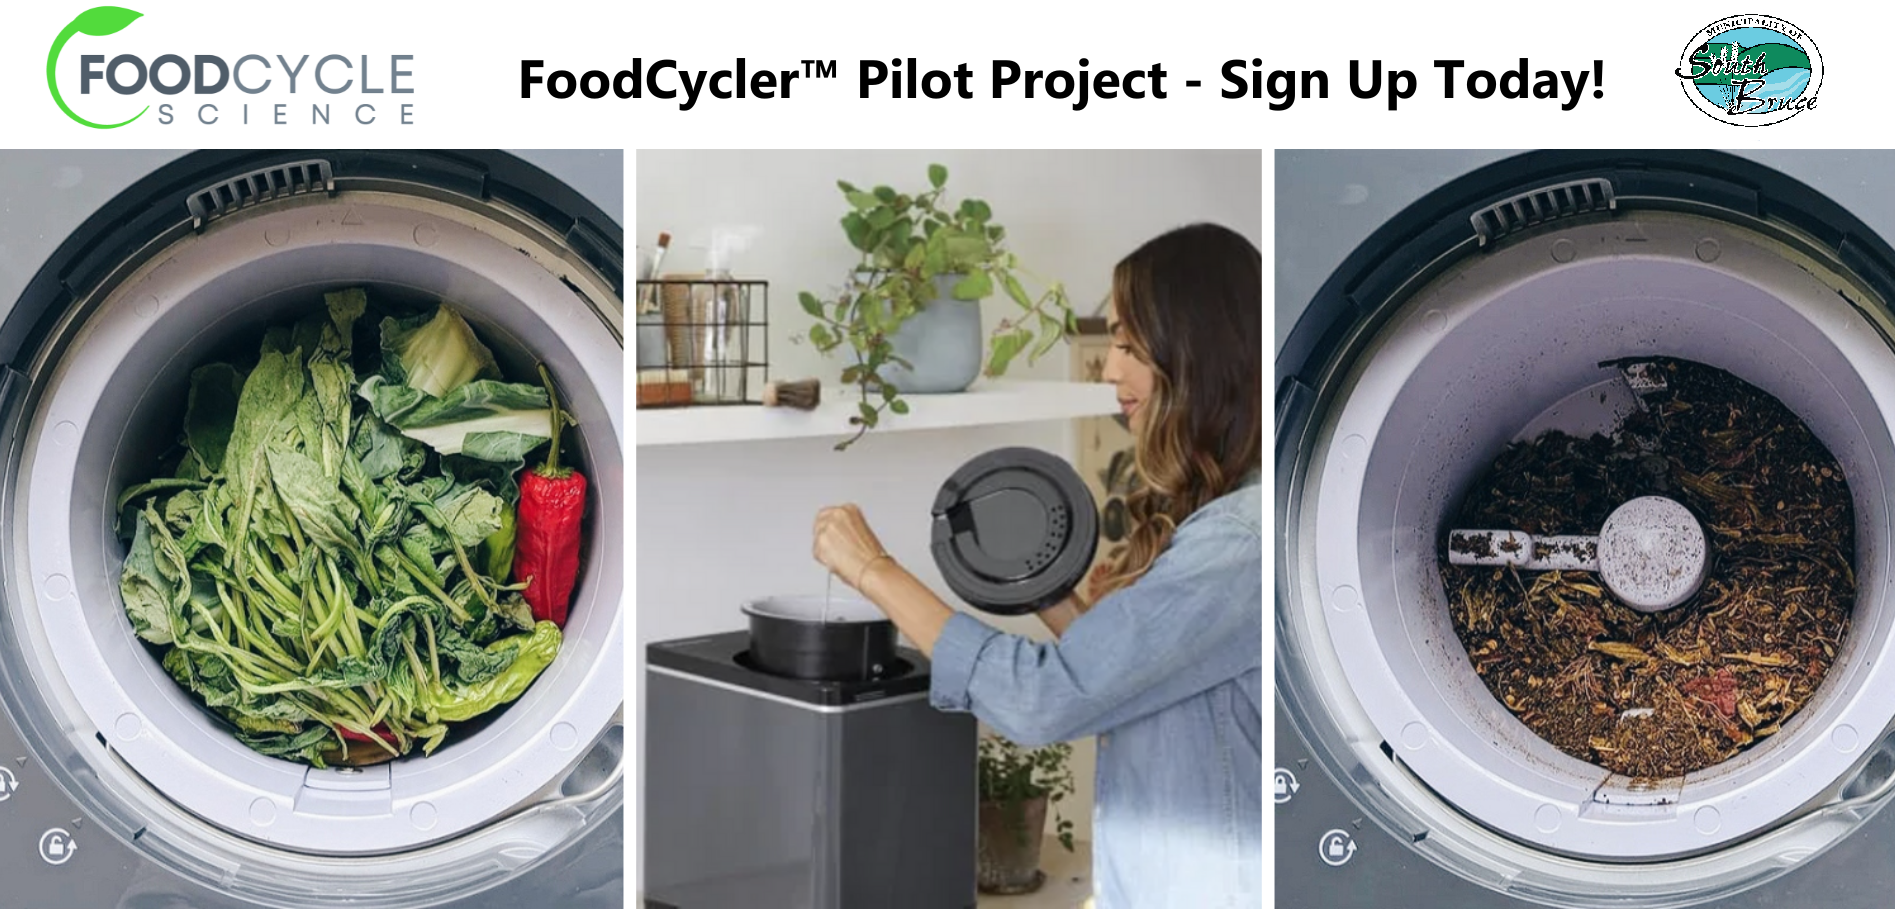 Foodcycler banner